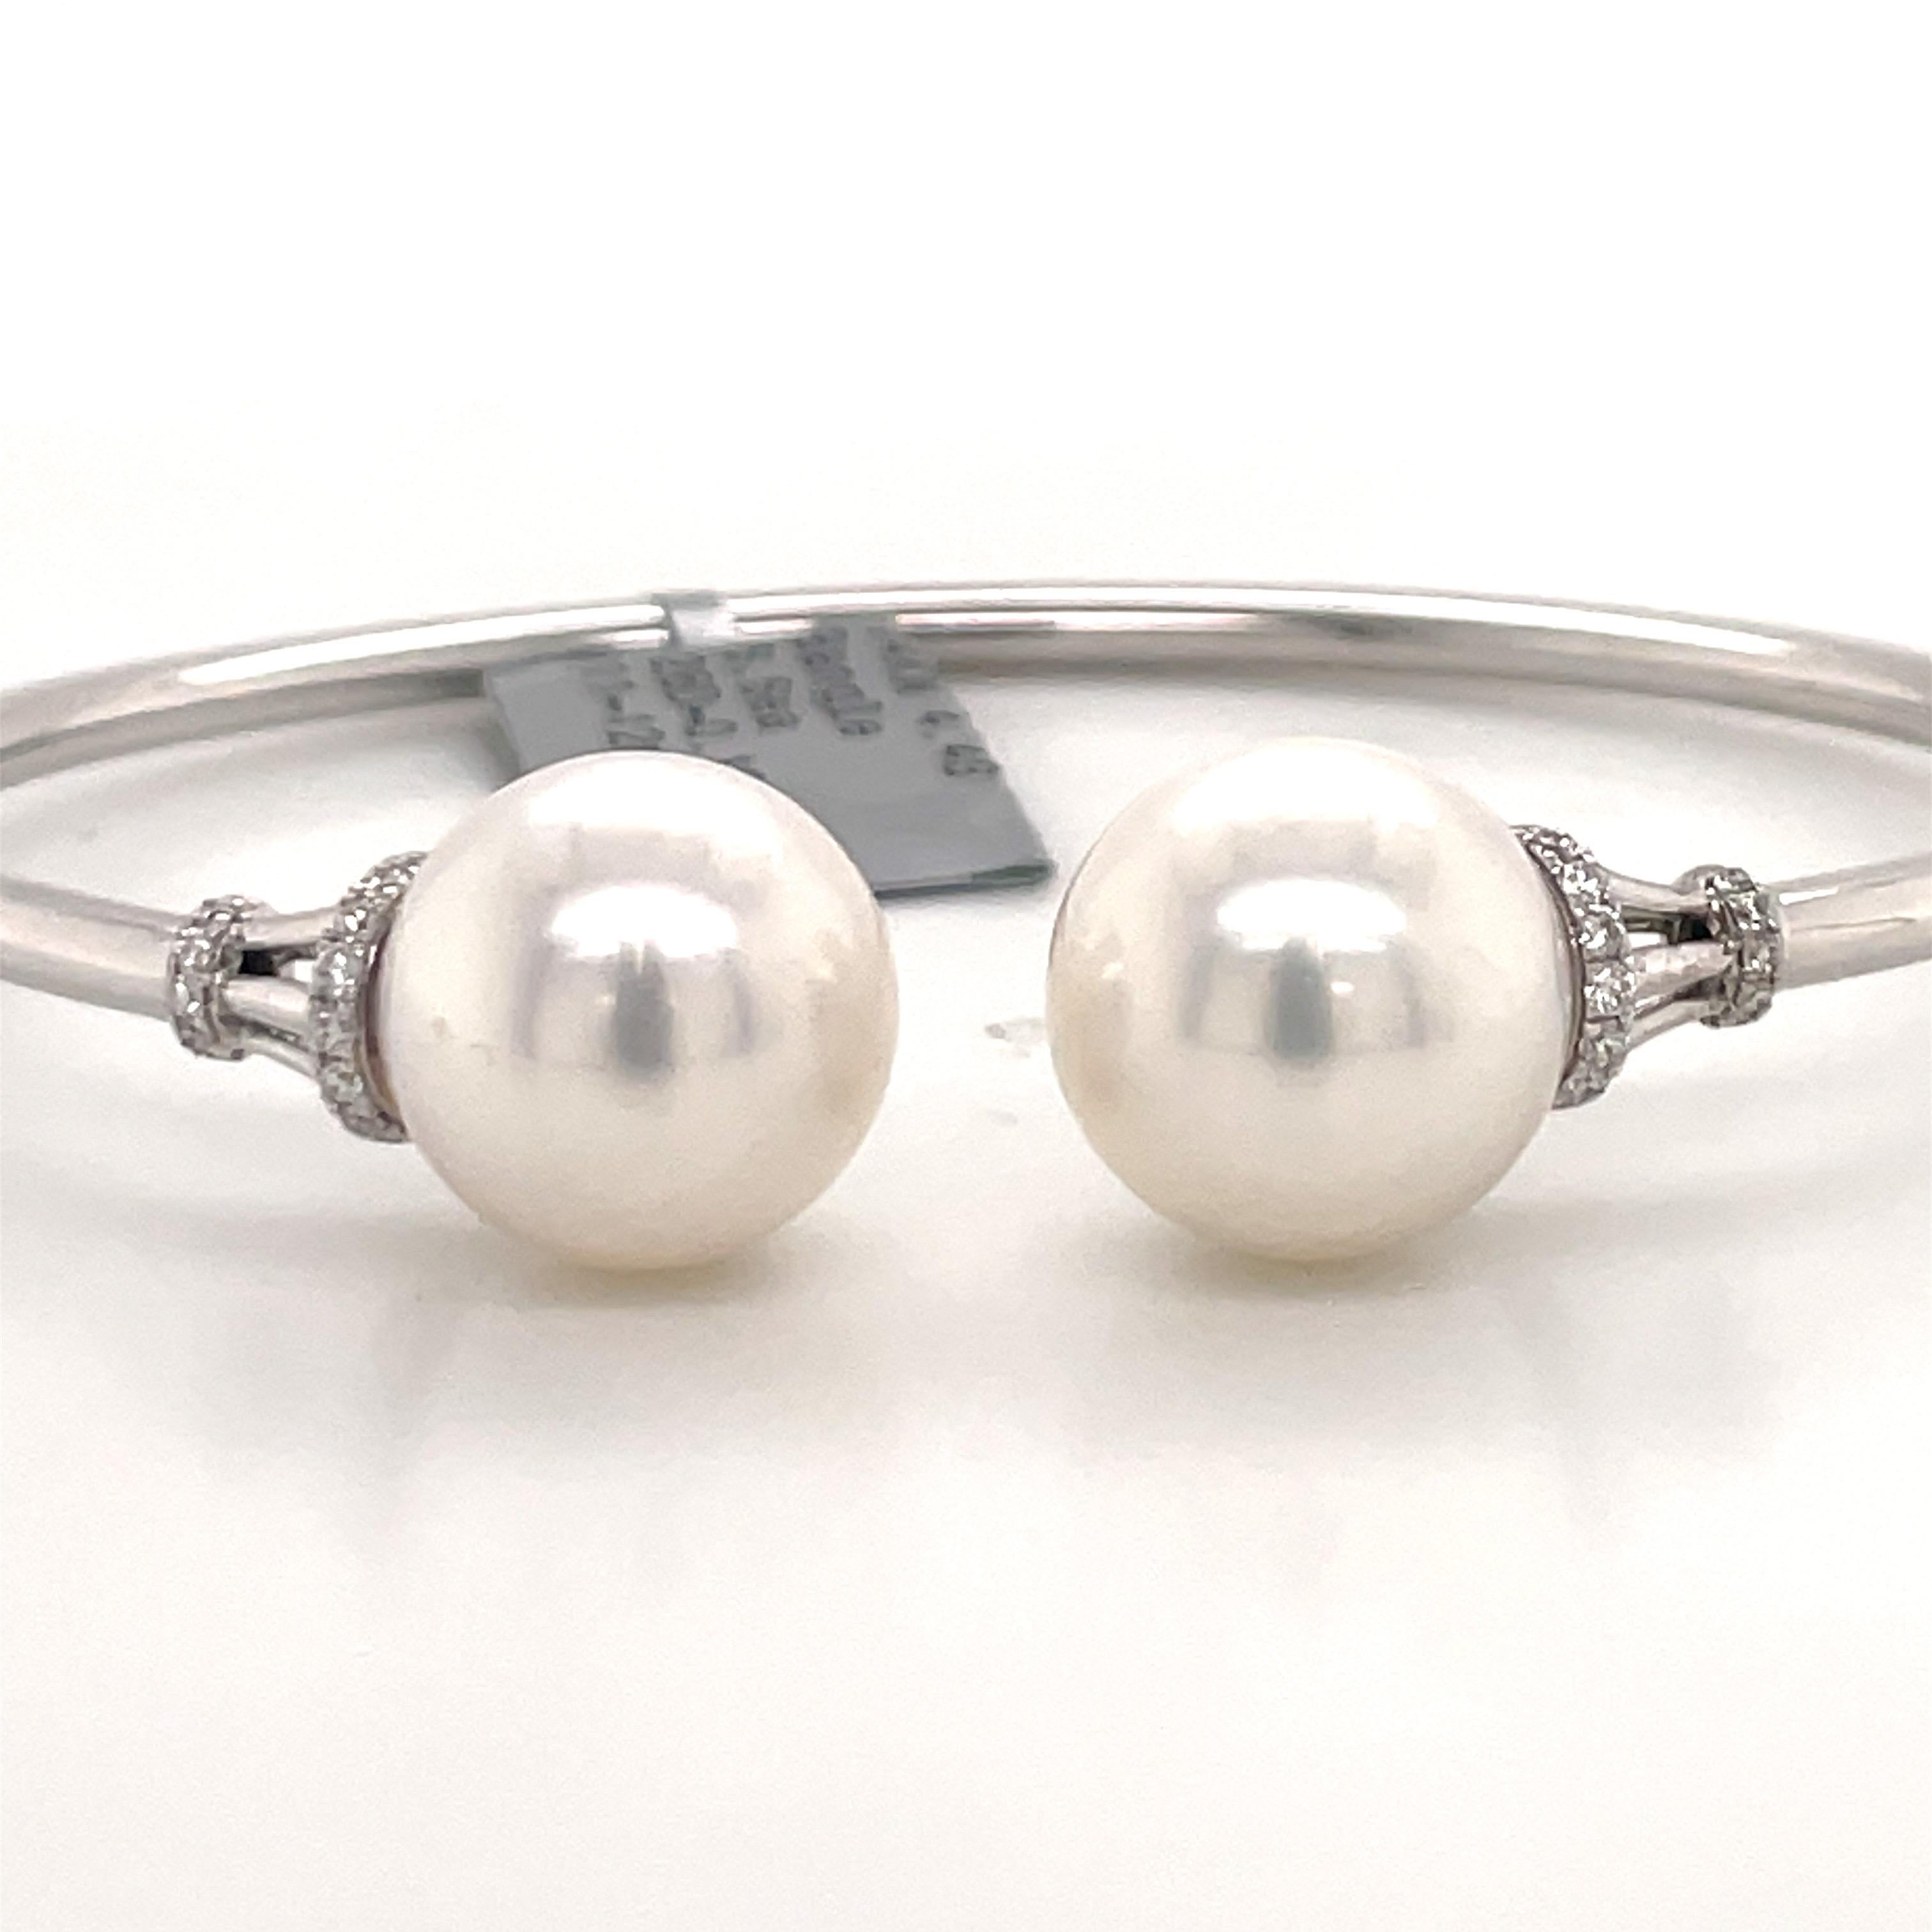 South Sea Pearl Diamond Bangle Bracelet 0.19 Carats 14 Karat White Gold In New Condition For Sale In New York, NY